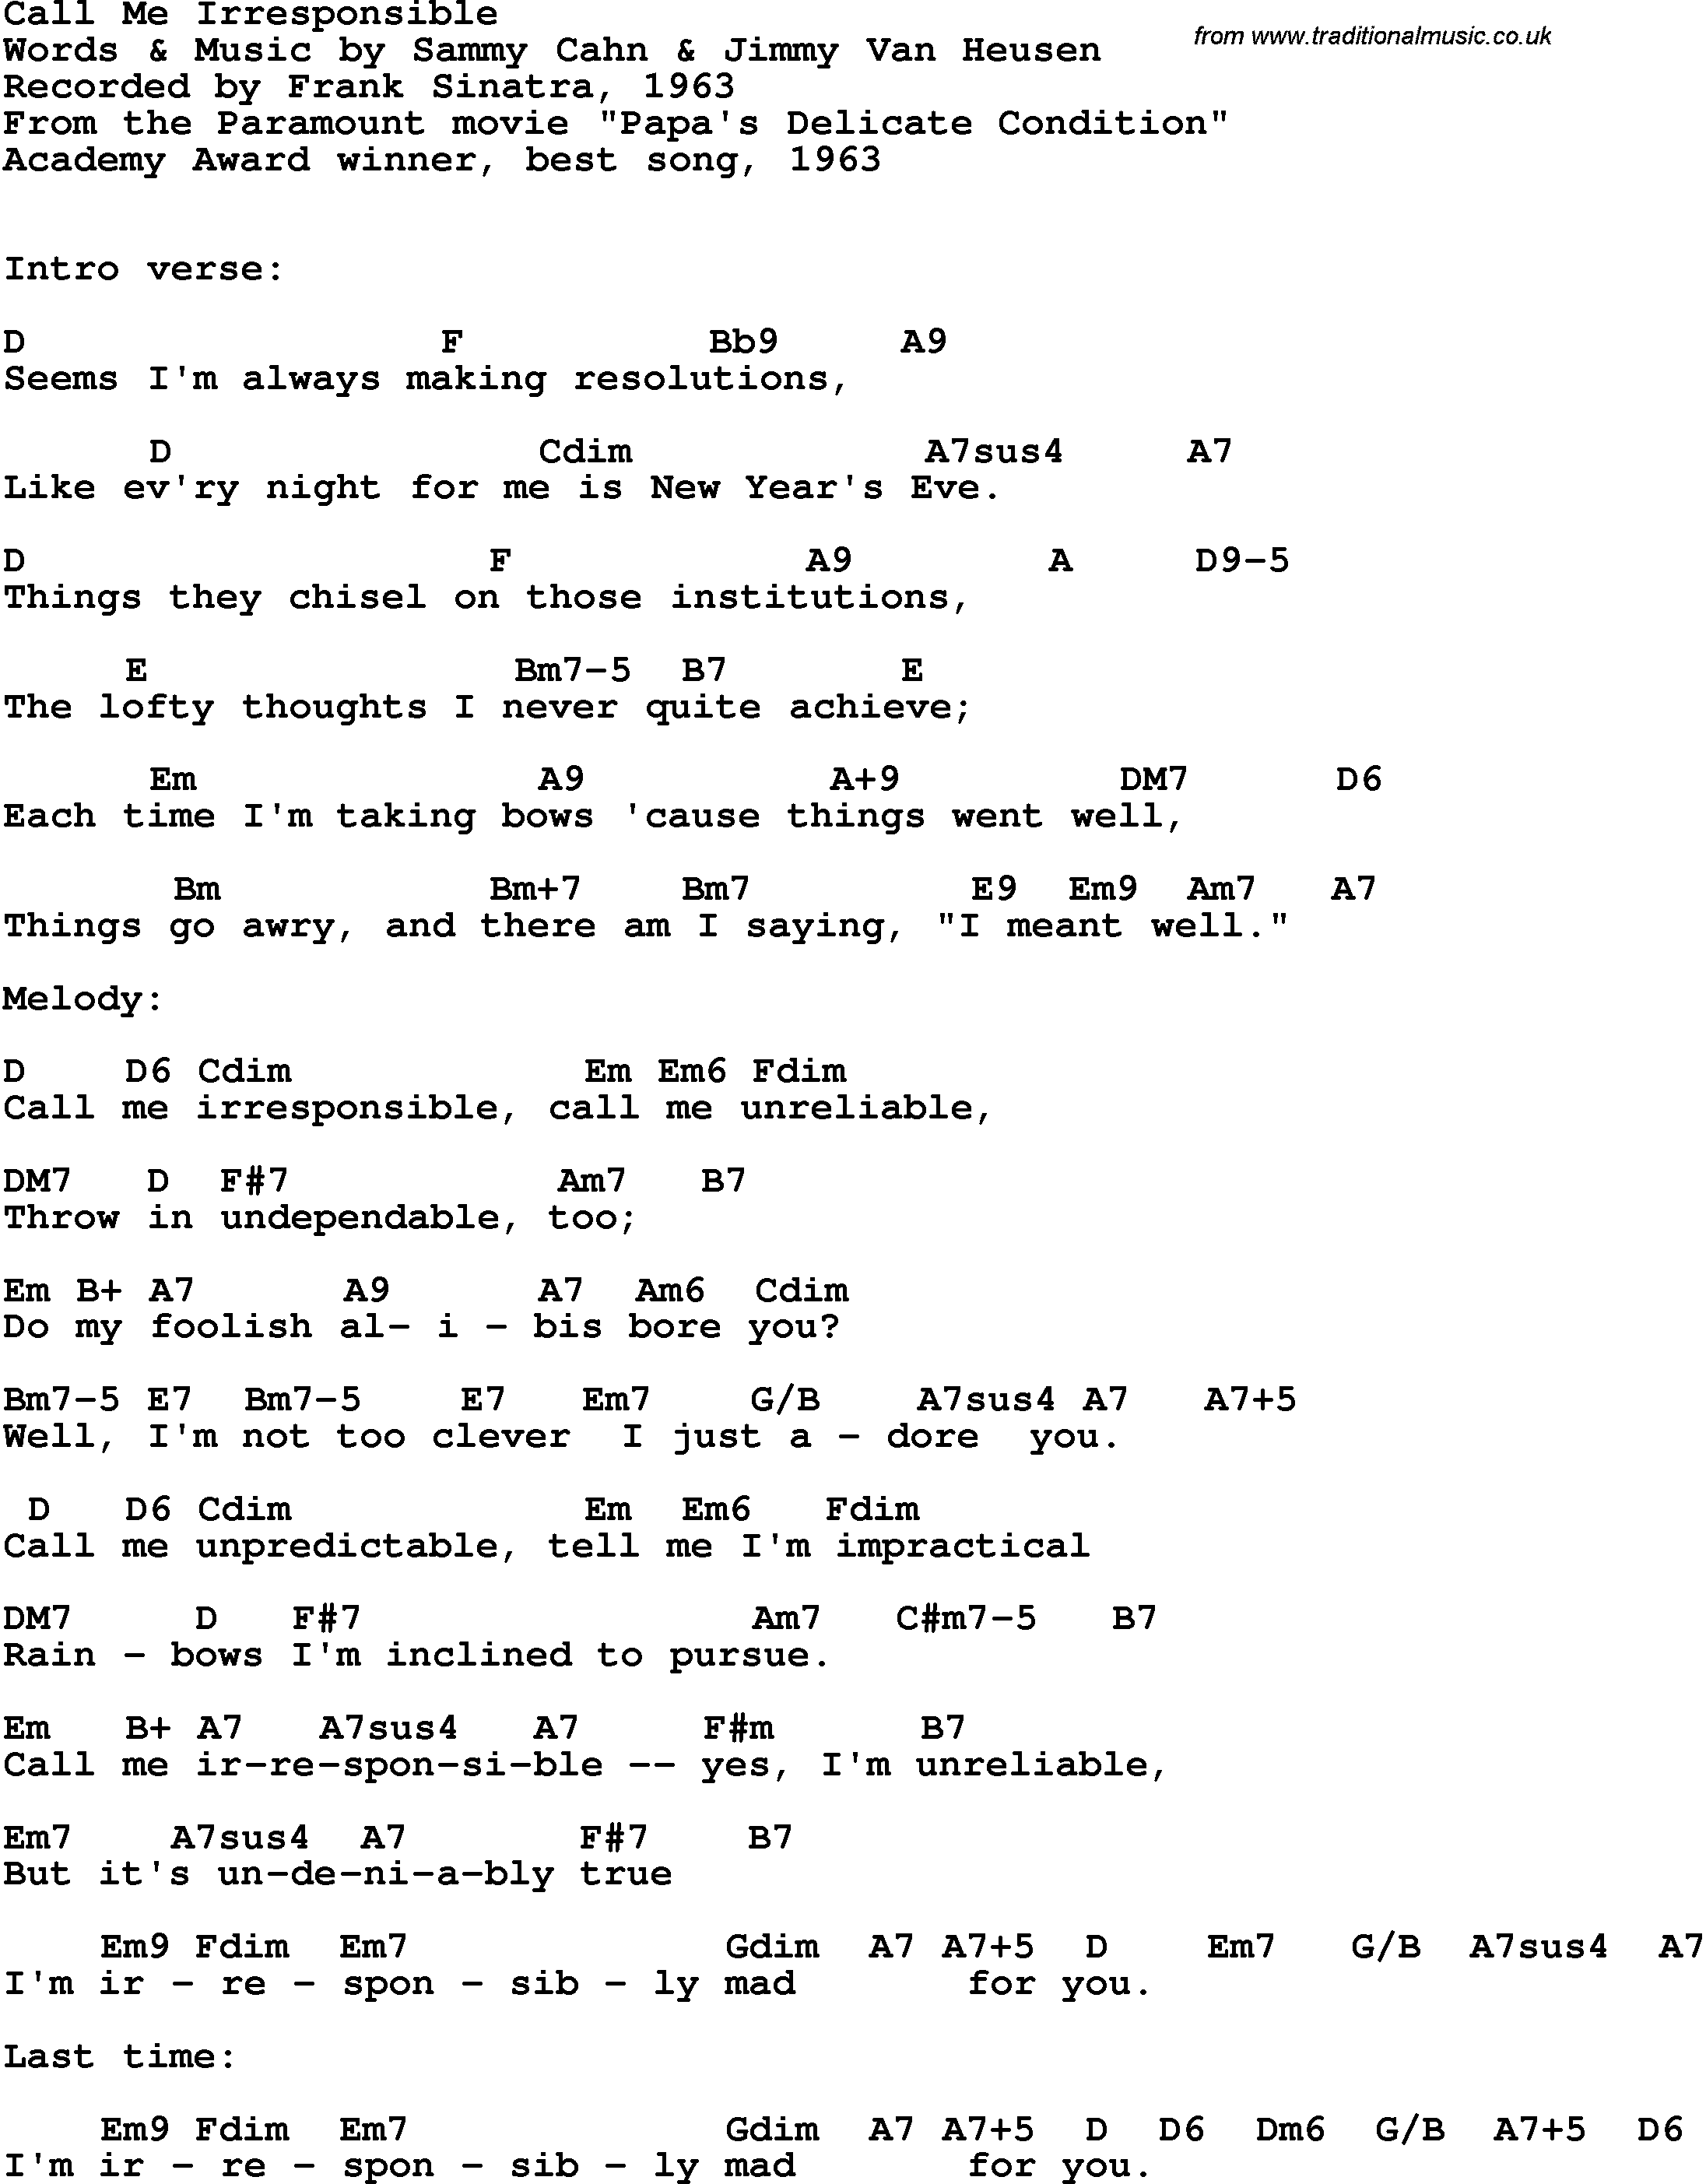 Song Lyrics with guitar chords for Call Me Irresponsible - Frank Sinatra, 1963